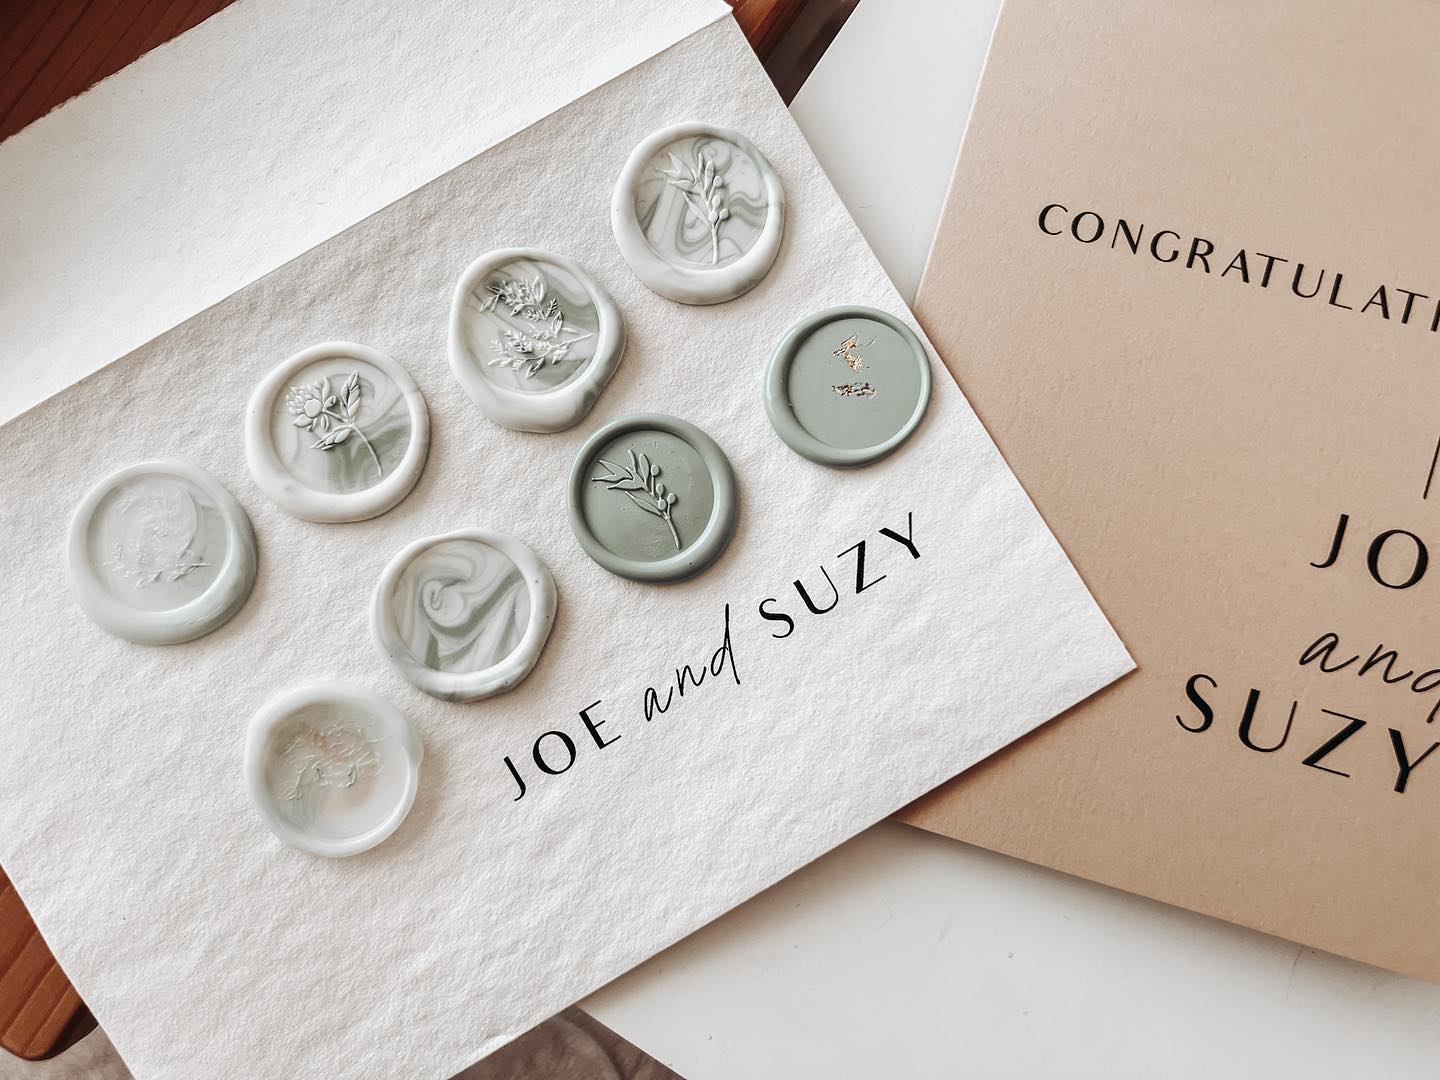 The pretty wax seal options to match with this modern & minimal card set; which one would you choose?🫠
.
.
.